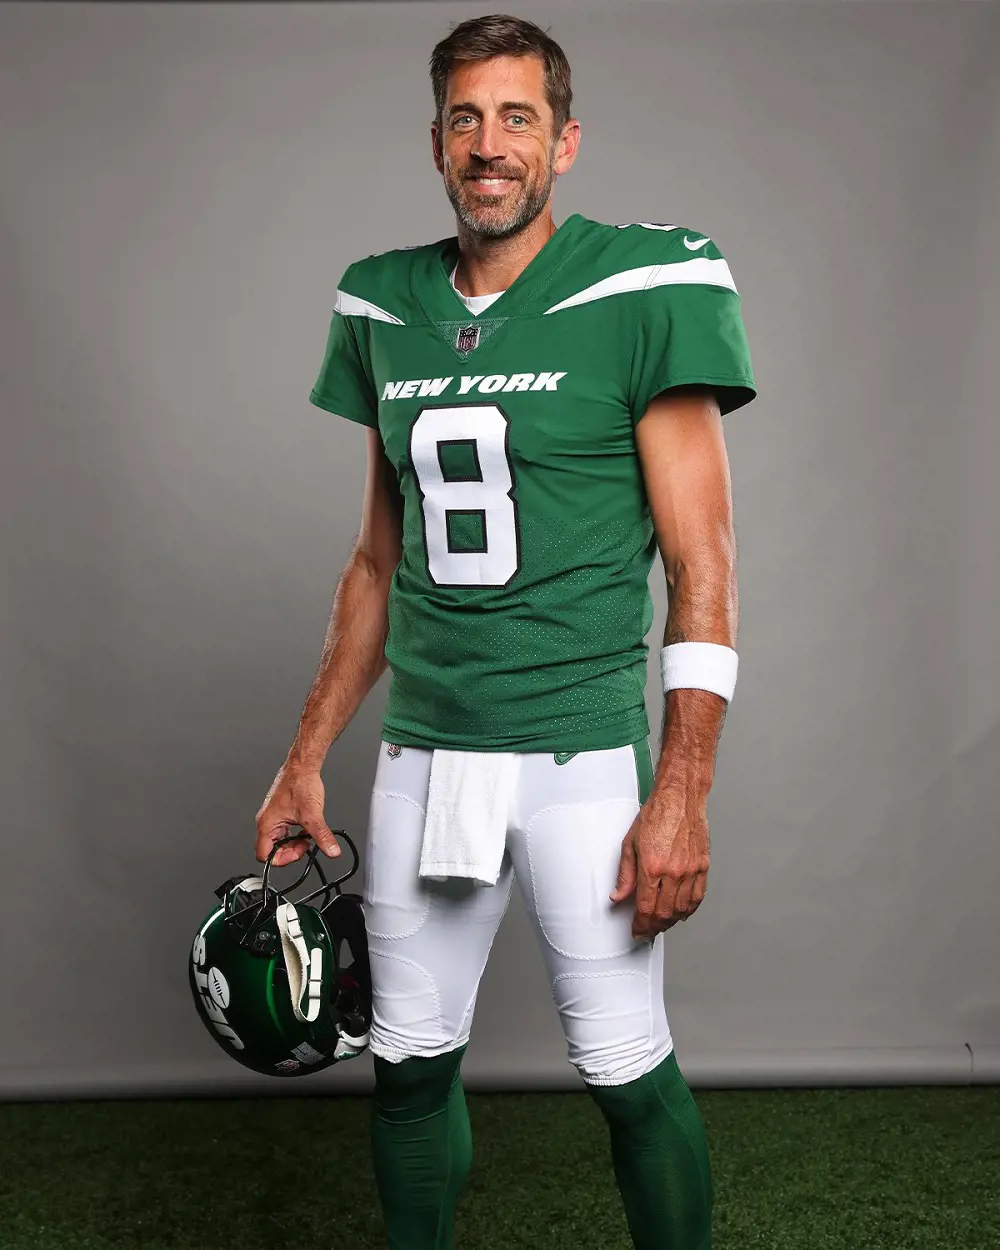 Aaron Rodgers in his new uniform for the 2023-24 season as a player for the Jets